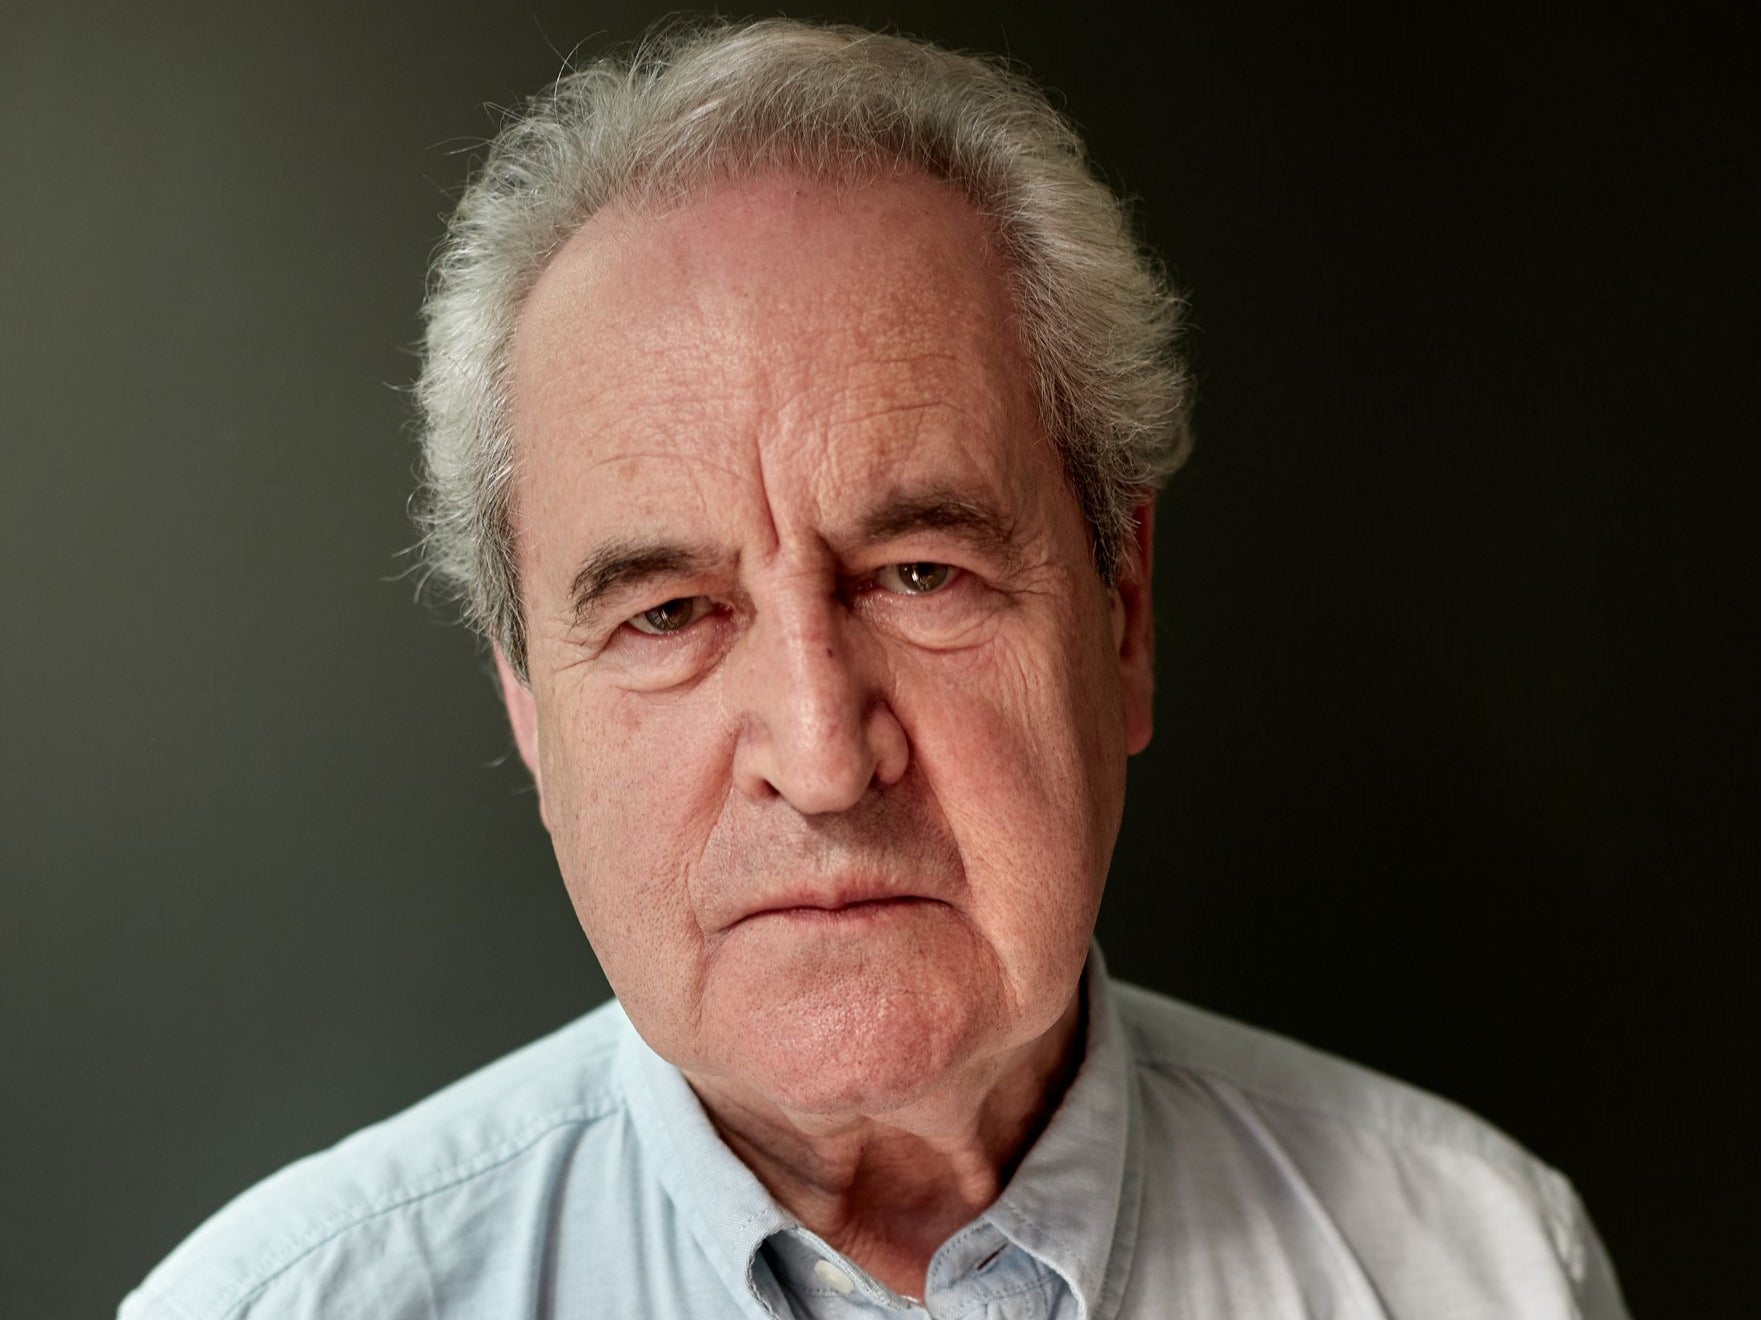 John Banville: ‘I don’t read praise. I don’t read anything about myself at all’